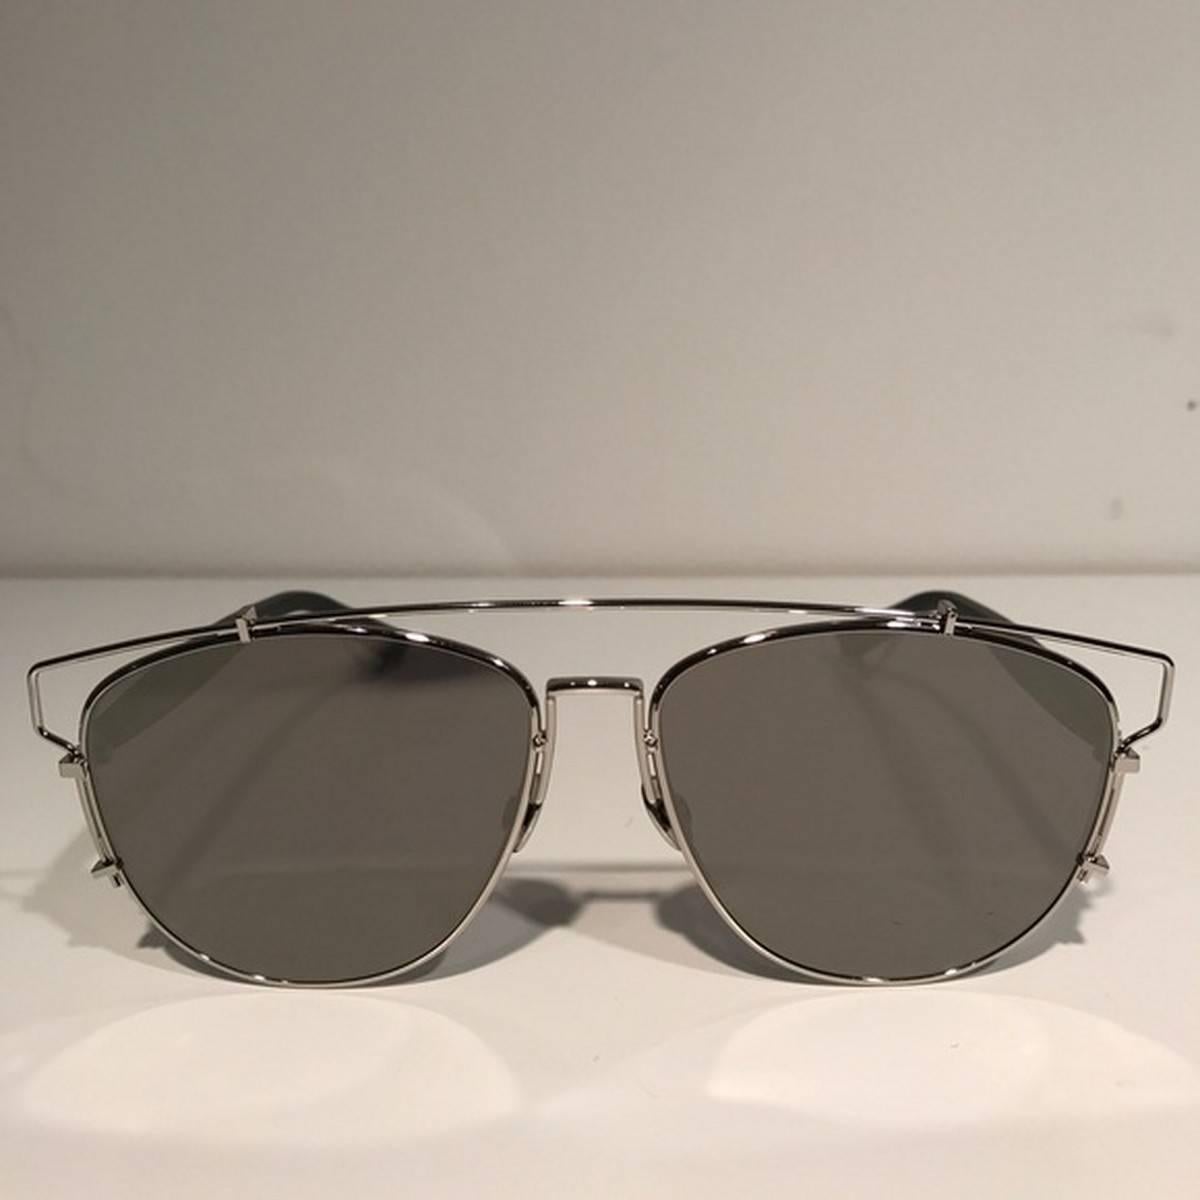 Dior Silver Mirrored Technologic Sunglasses
Color: Silver/Gray
Size: OS

Brand new with box.
Unused condition.
No flaws.
Made in Italy.